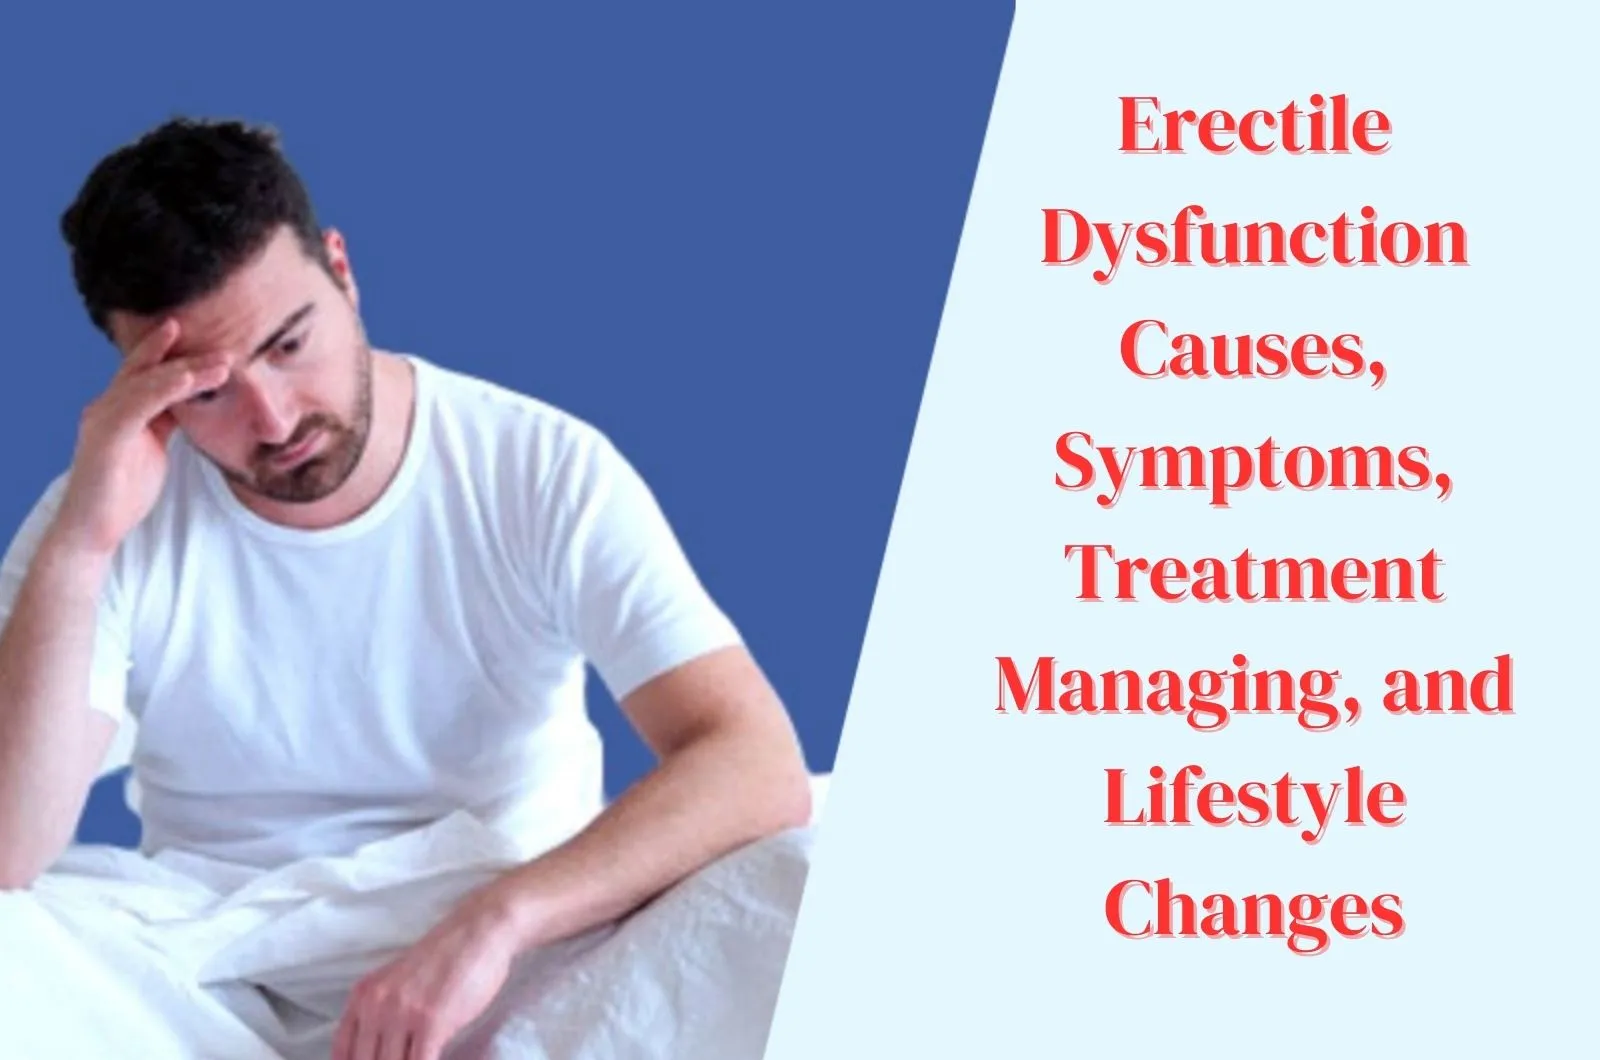 Erectile Dysfunction: Causes, Symptoms, Treatment Managing and Lifestyle Changes